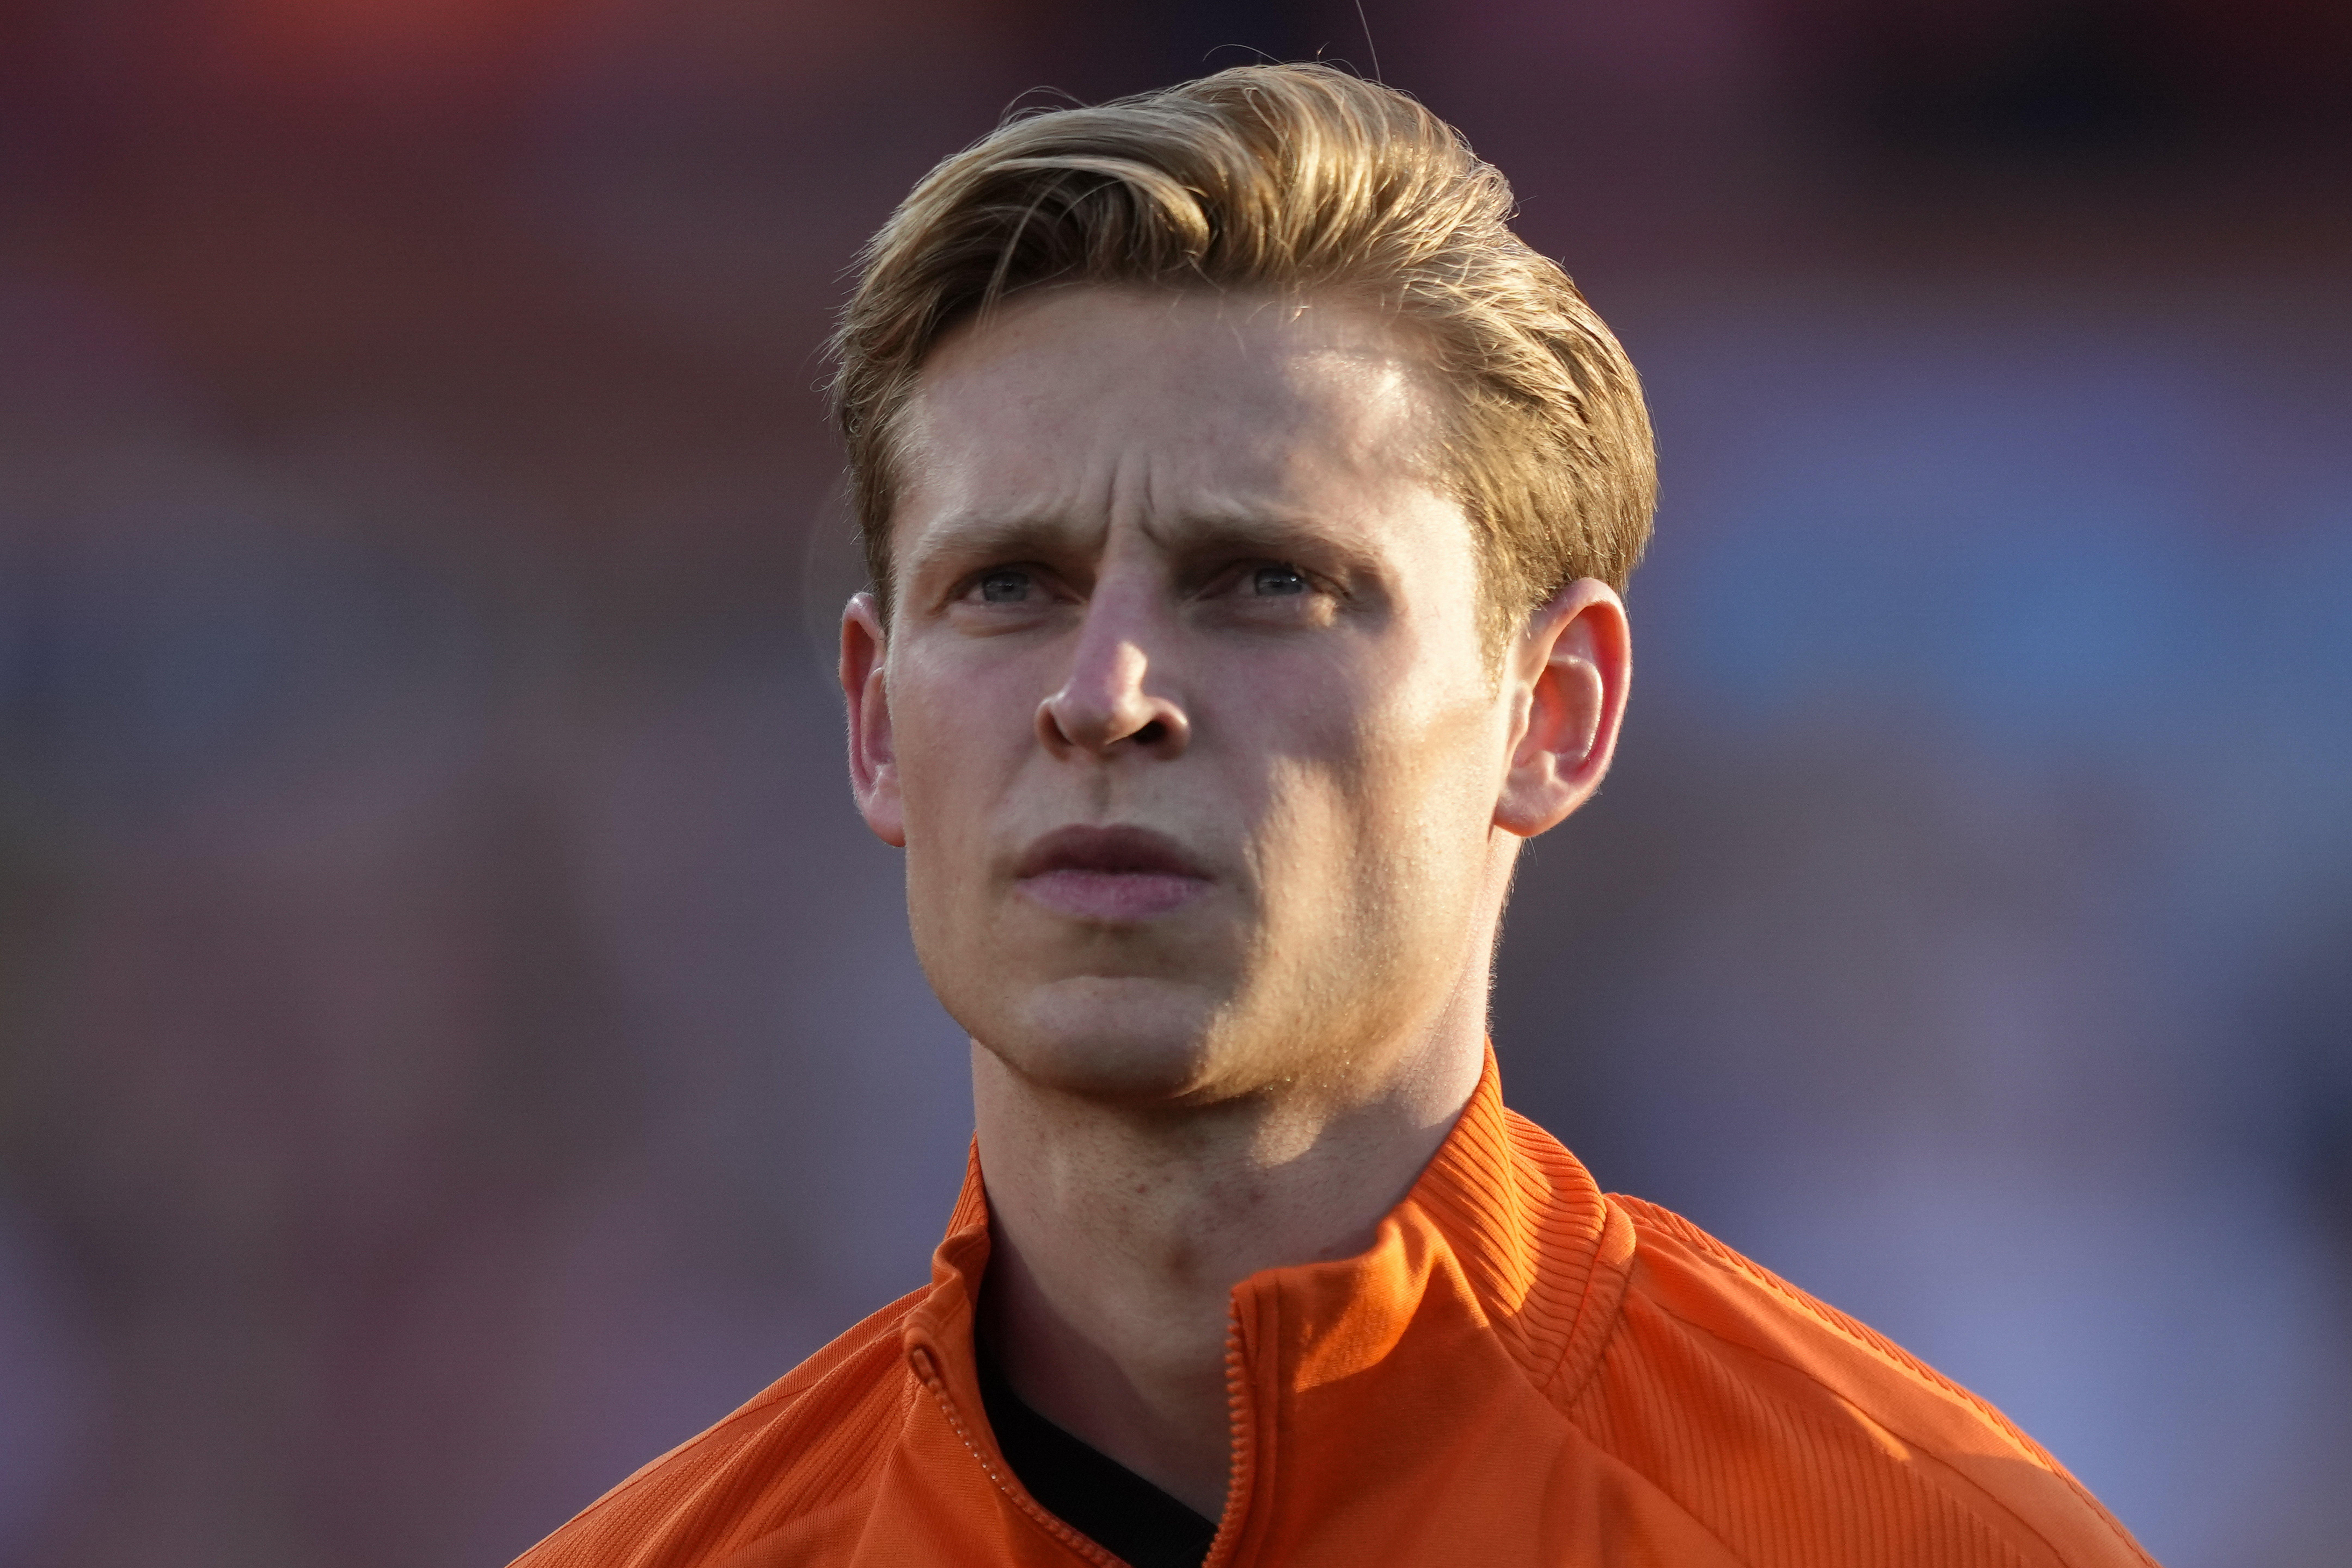 lines up prior to the UEFA Nations League soccer match between the Netherlands and Poland at De Kuip stadium in Rotterdam, Netherlands, June 11, 2022. Barcelona has reached an agreement with Manchester United for the potential transfer of Netherlands midfielder de Jong, who would still need to approve the move, a person at the Spanish club with knowledge of the deal told The Associated Press on Thursday, July 14, 2022. ()